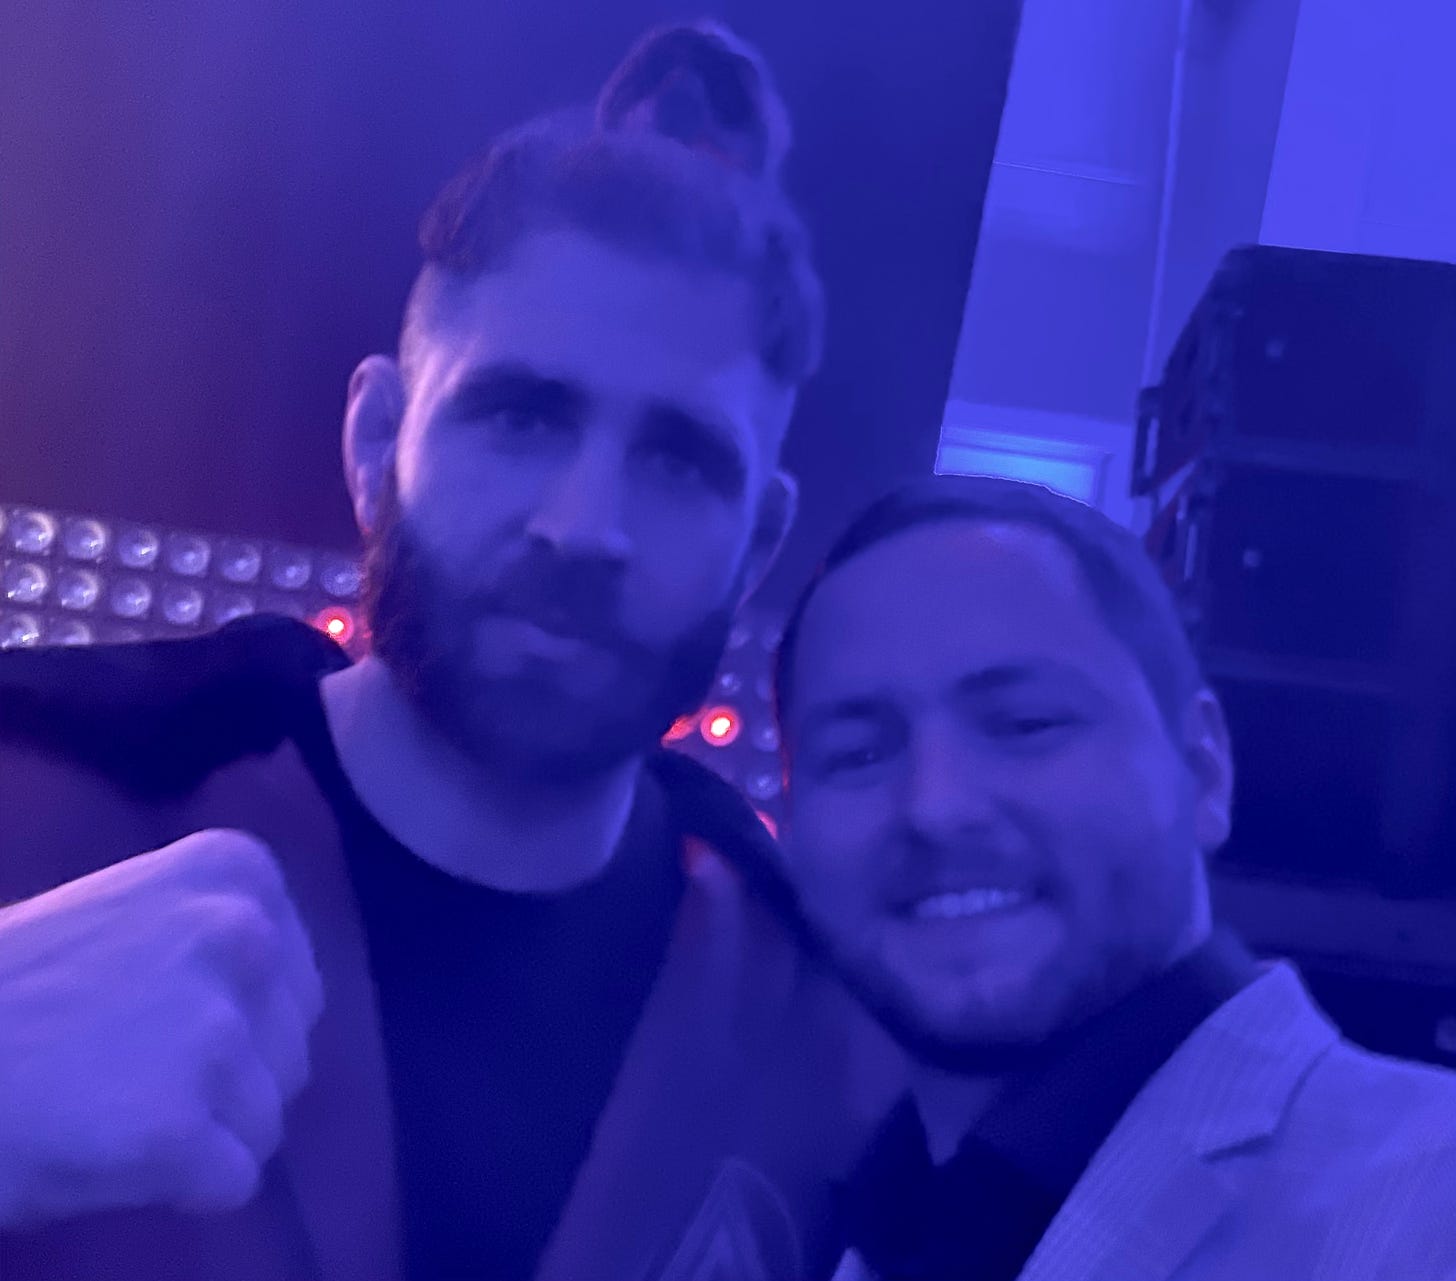 David Simões, founder of Sounds Good Agency, and Jiri Prochazka, MMA fighter and champion